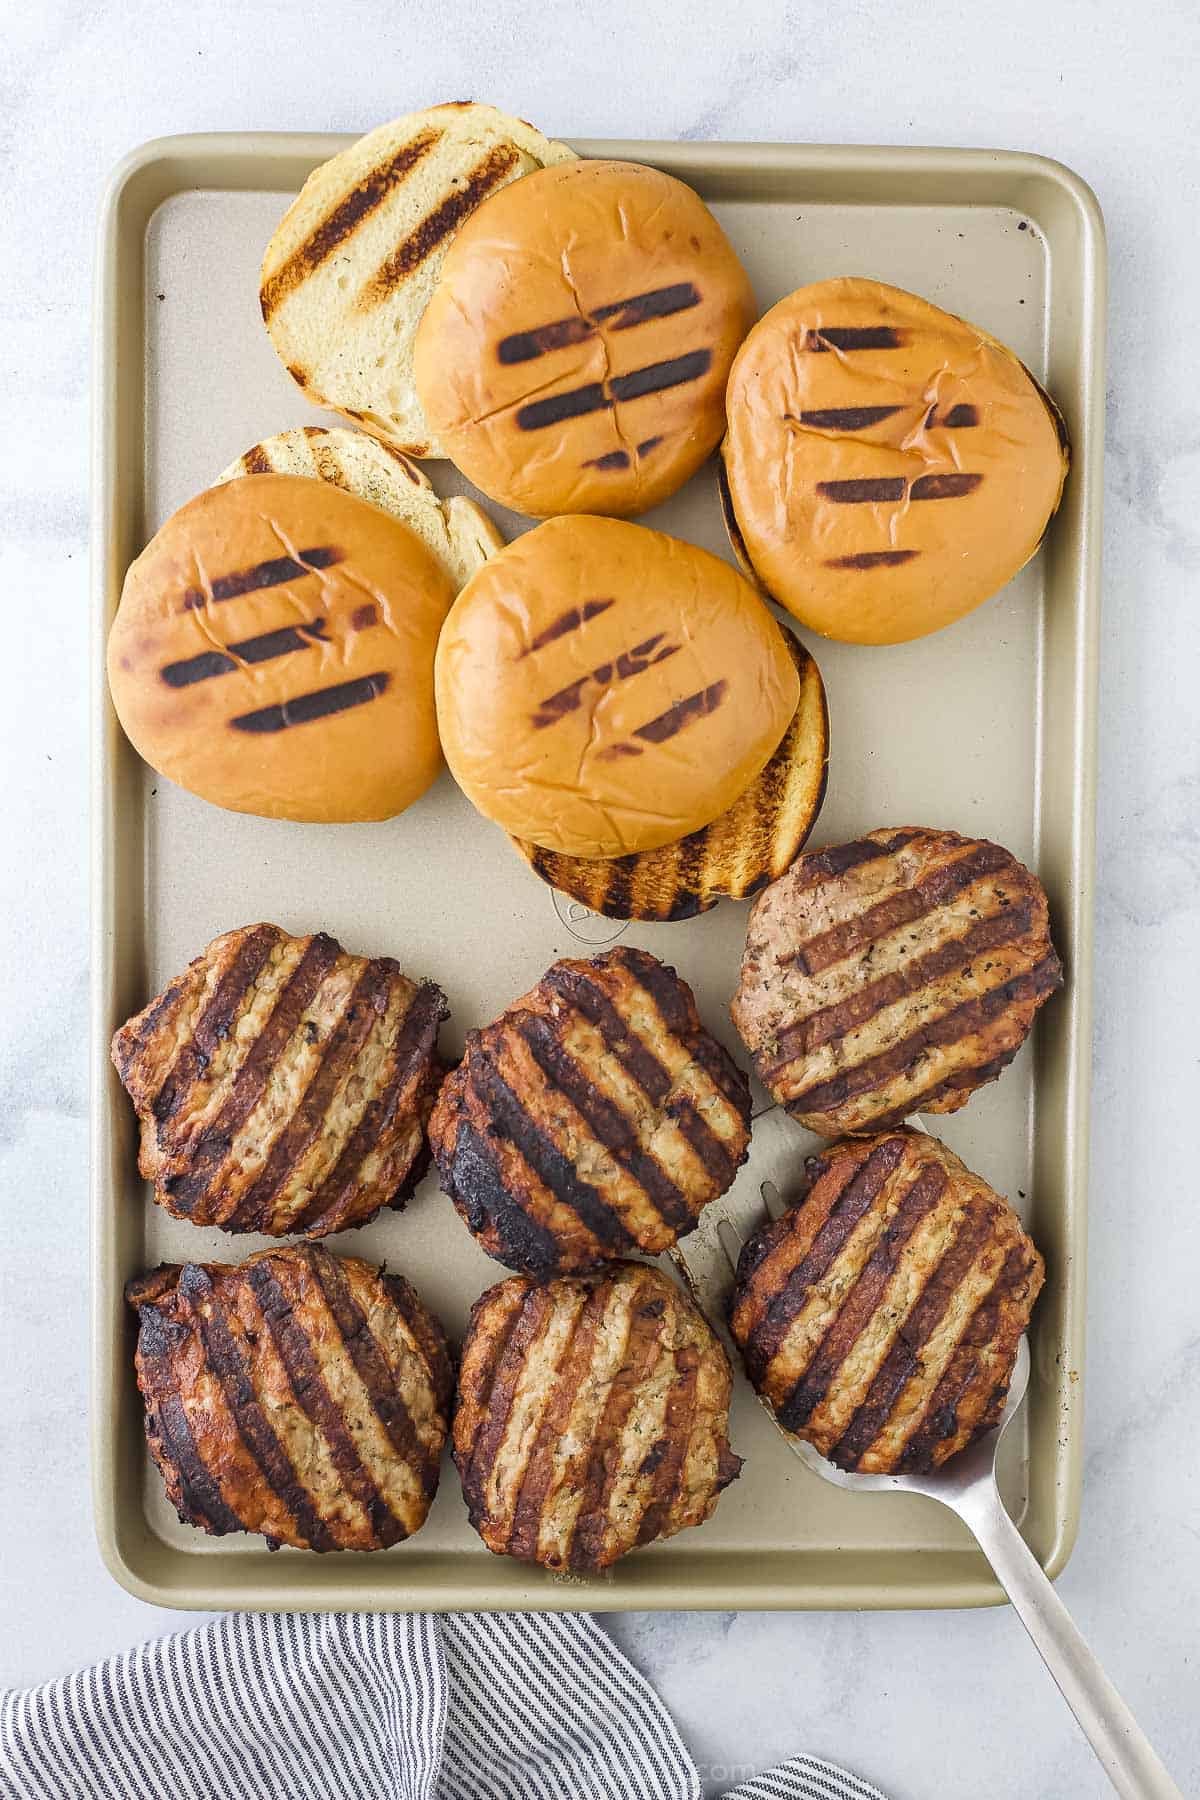 Grilled turkey patties on a baking sheet beside grilled burger buns